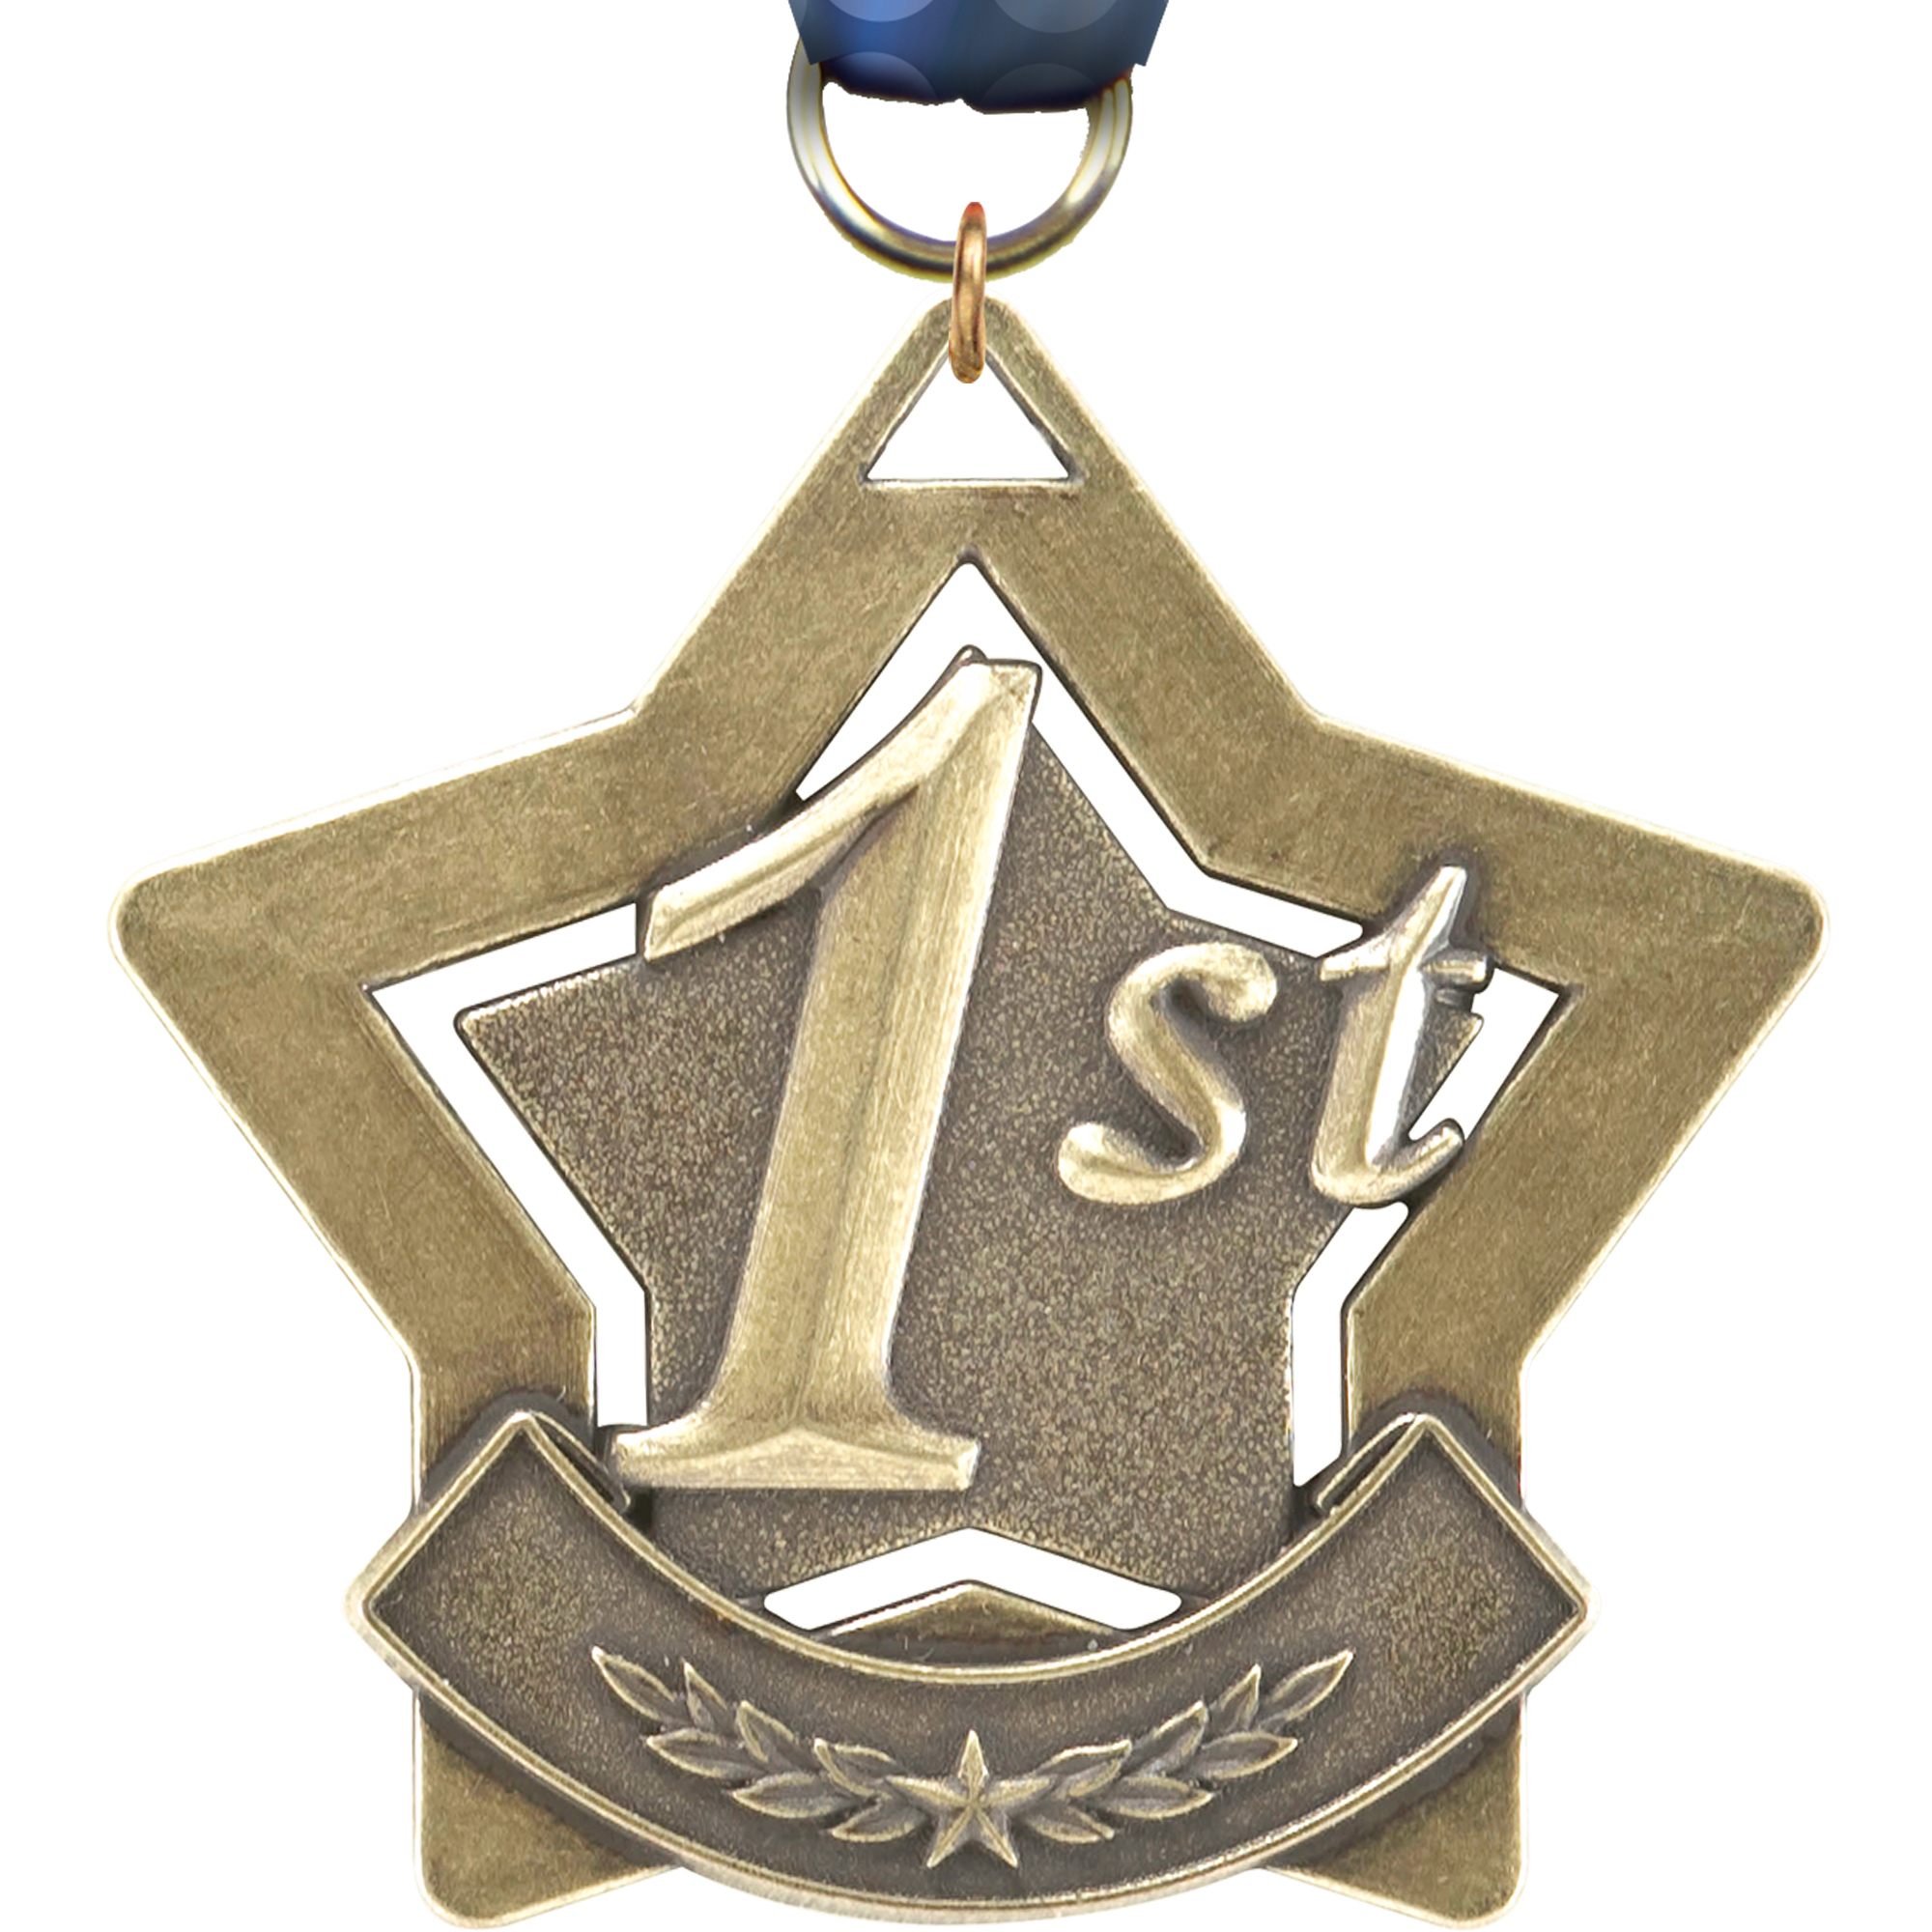 1st Place Star Medal